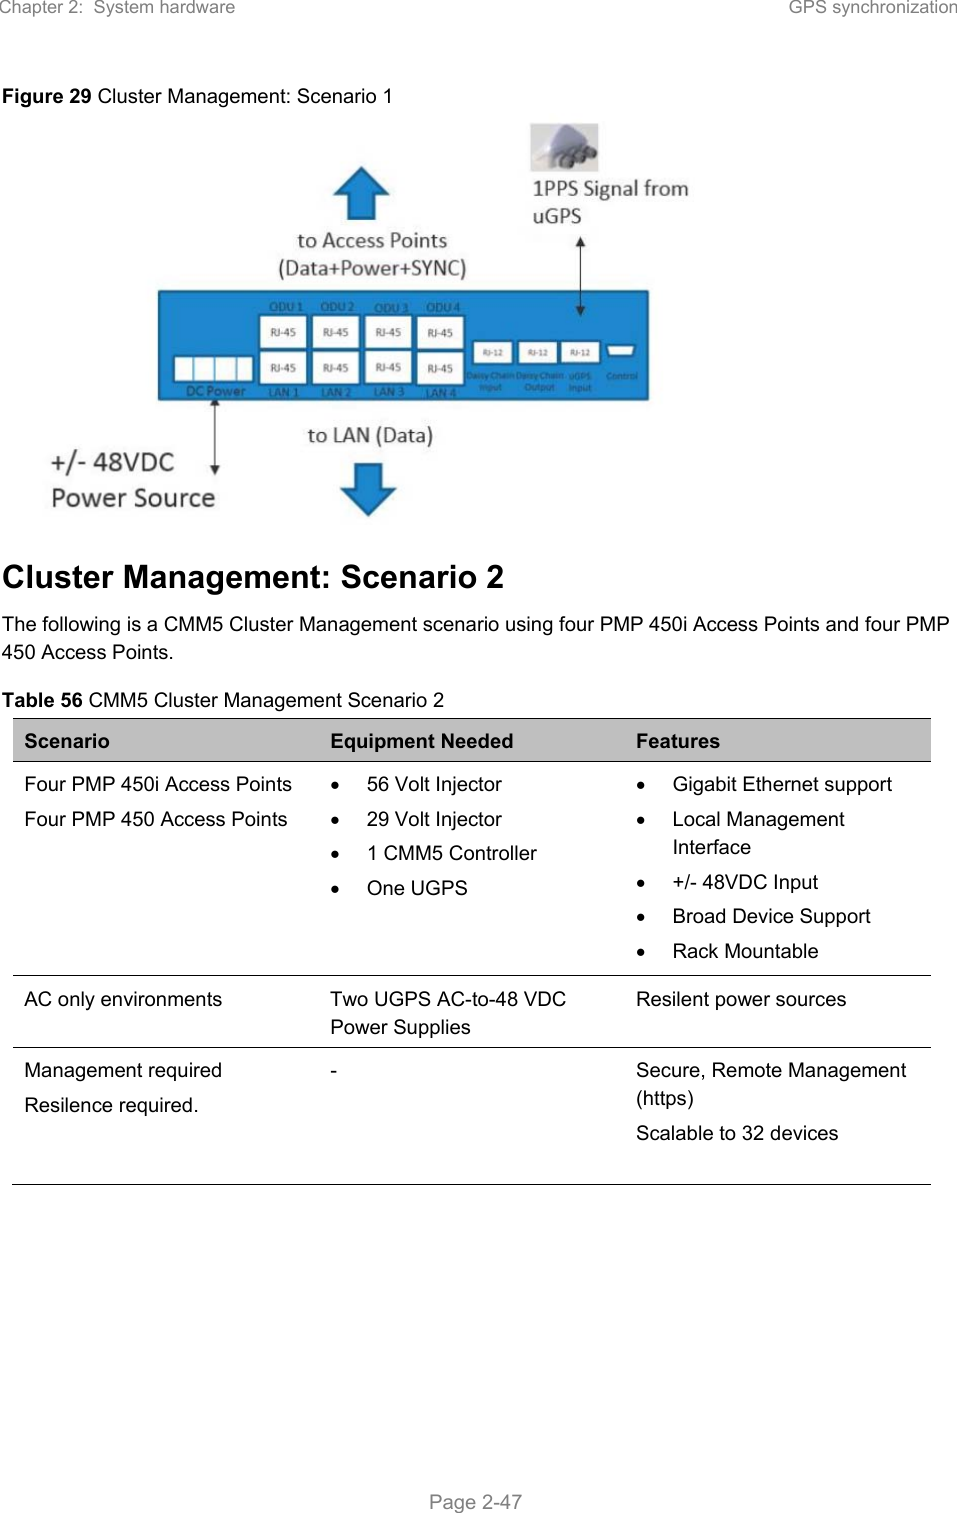 Chapter 2:  System hardware  GPS synchronization   Page 2-47 Figure 29 Cluster Management: Scenario 1  Cluster Management: Scenario 2 The following is a CMM5 Cluster Management scenario using four PMP 450i Access Points and four PMP 450 Access Points. Table 56 CMM5 Cluster Management Scenario 2 Scenario  Equipment Needed  Features Four PMP 450i Access Points Four PMP 450 Access Points   56 Volt Injector   29 Volt Injector   1 CMM5 Controller   One UGPS   Gigabit Ethernet support   Local Management Interface   +/- 48VDC Input   Broad Device Support   Rack Mountable AC only environments  Two UGPS AC-to-48 VDC Power Supplies Resilent power sources Management required Resilence required. -  Secure, Remote Management (https) Scalable to 32 devices    